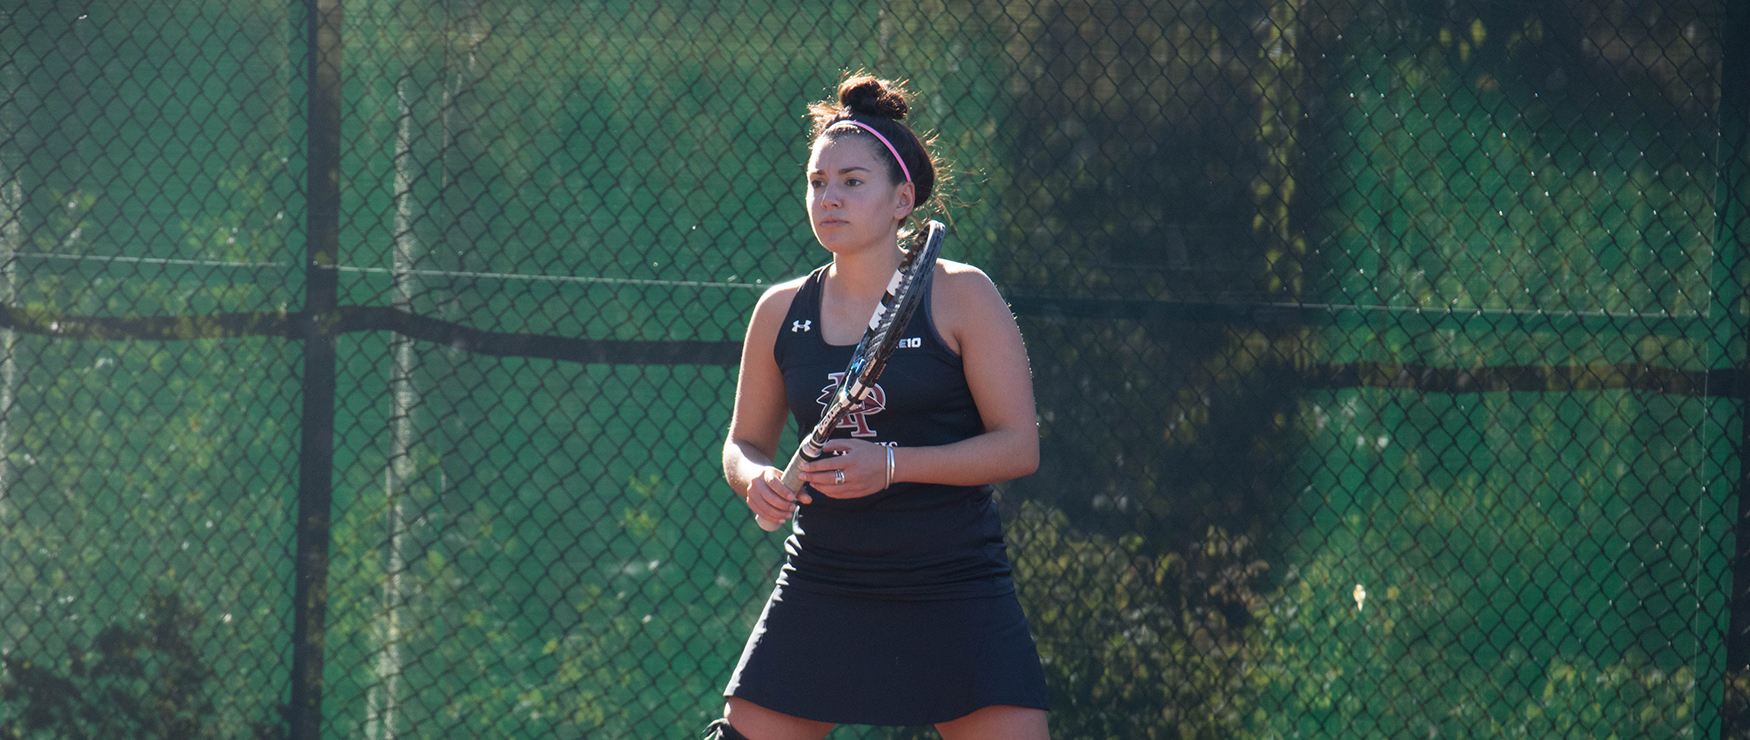 Women’s Tennis Grinds Out 5-4 Win Over Emerson